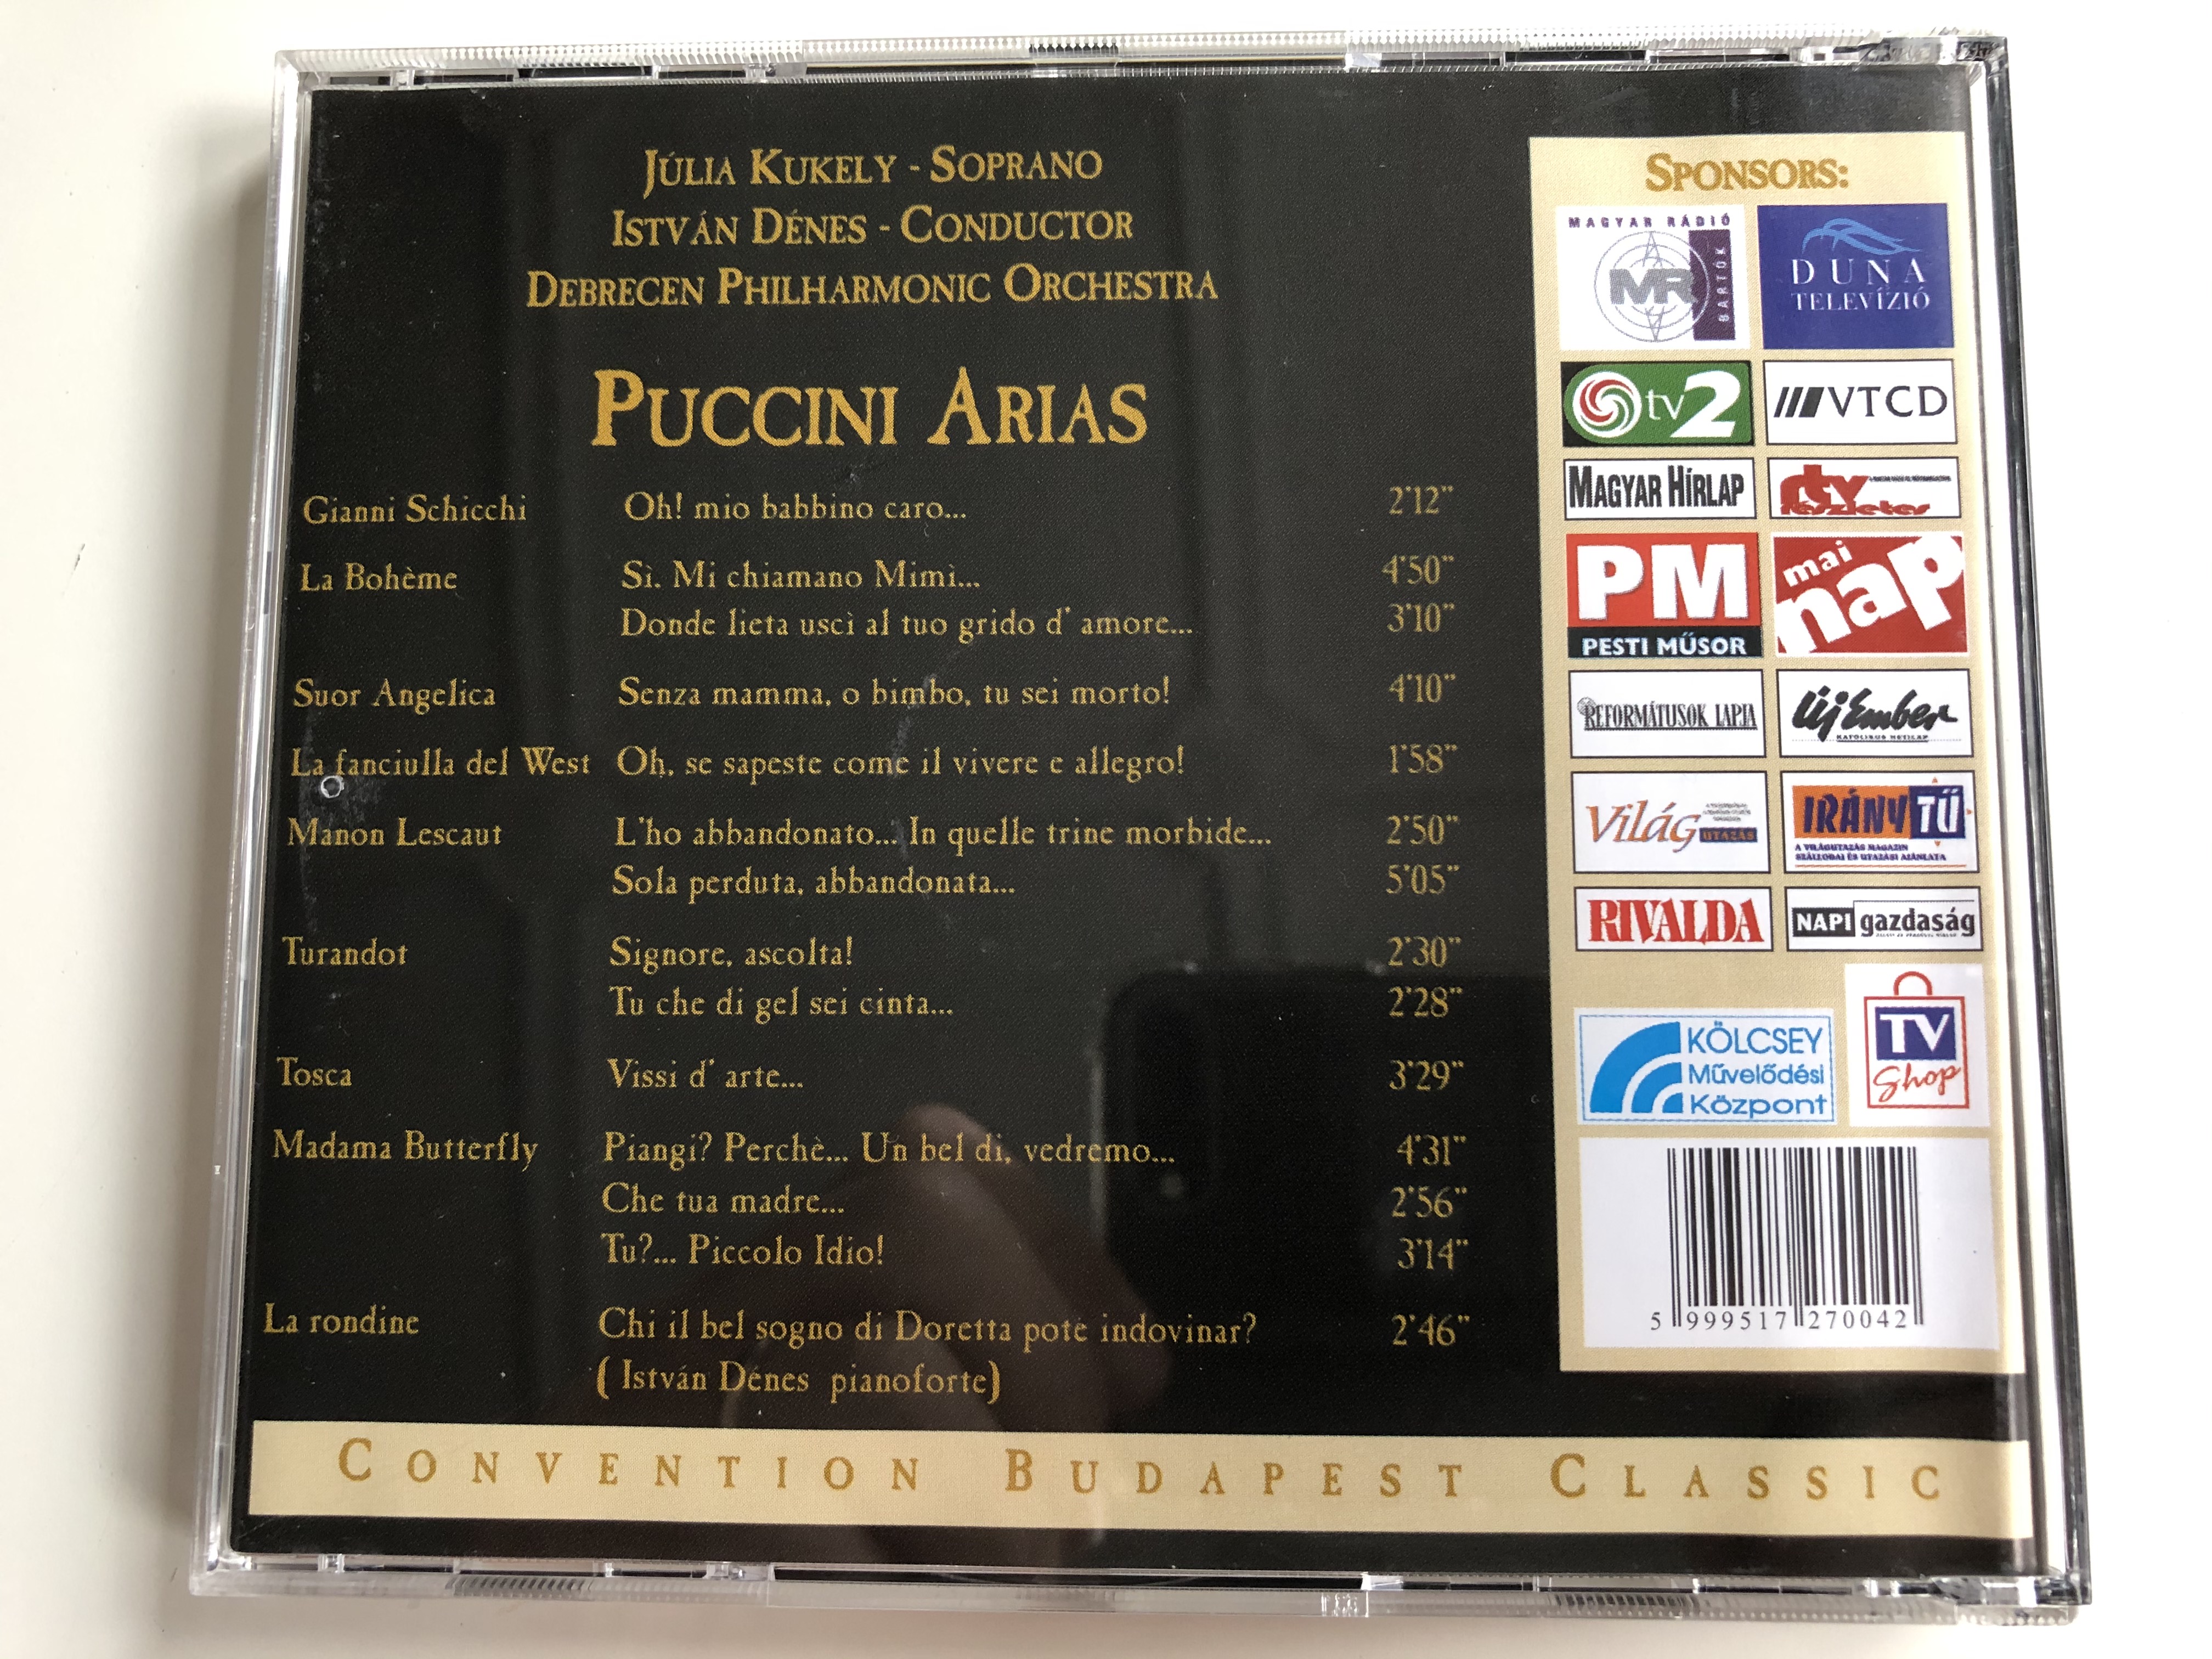 julia-kukely-puccini-arias-debrecen-philharmonic-orchestra-conducted-by-istvan-denes-convention-budapest-classic-audio-cd-1999-cbp-004-6-.jpg